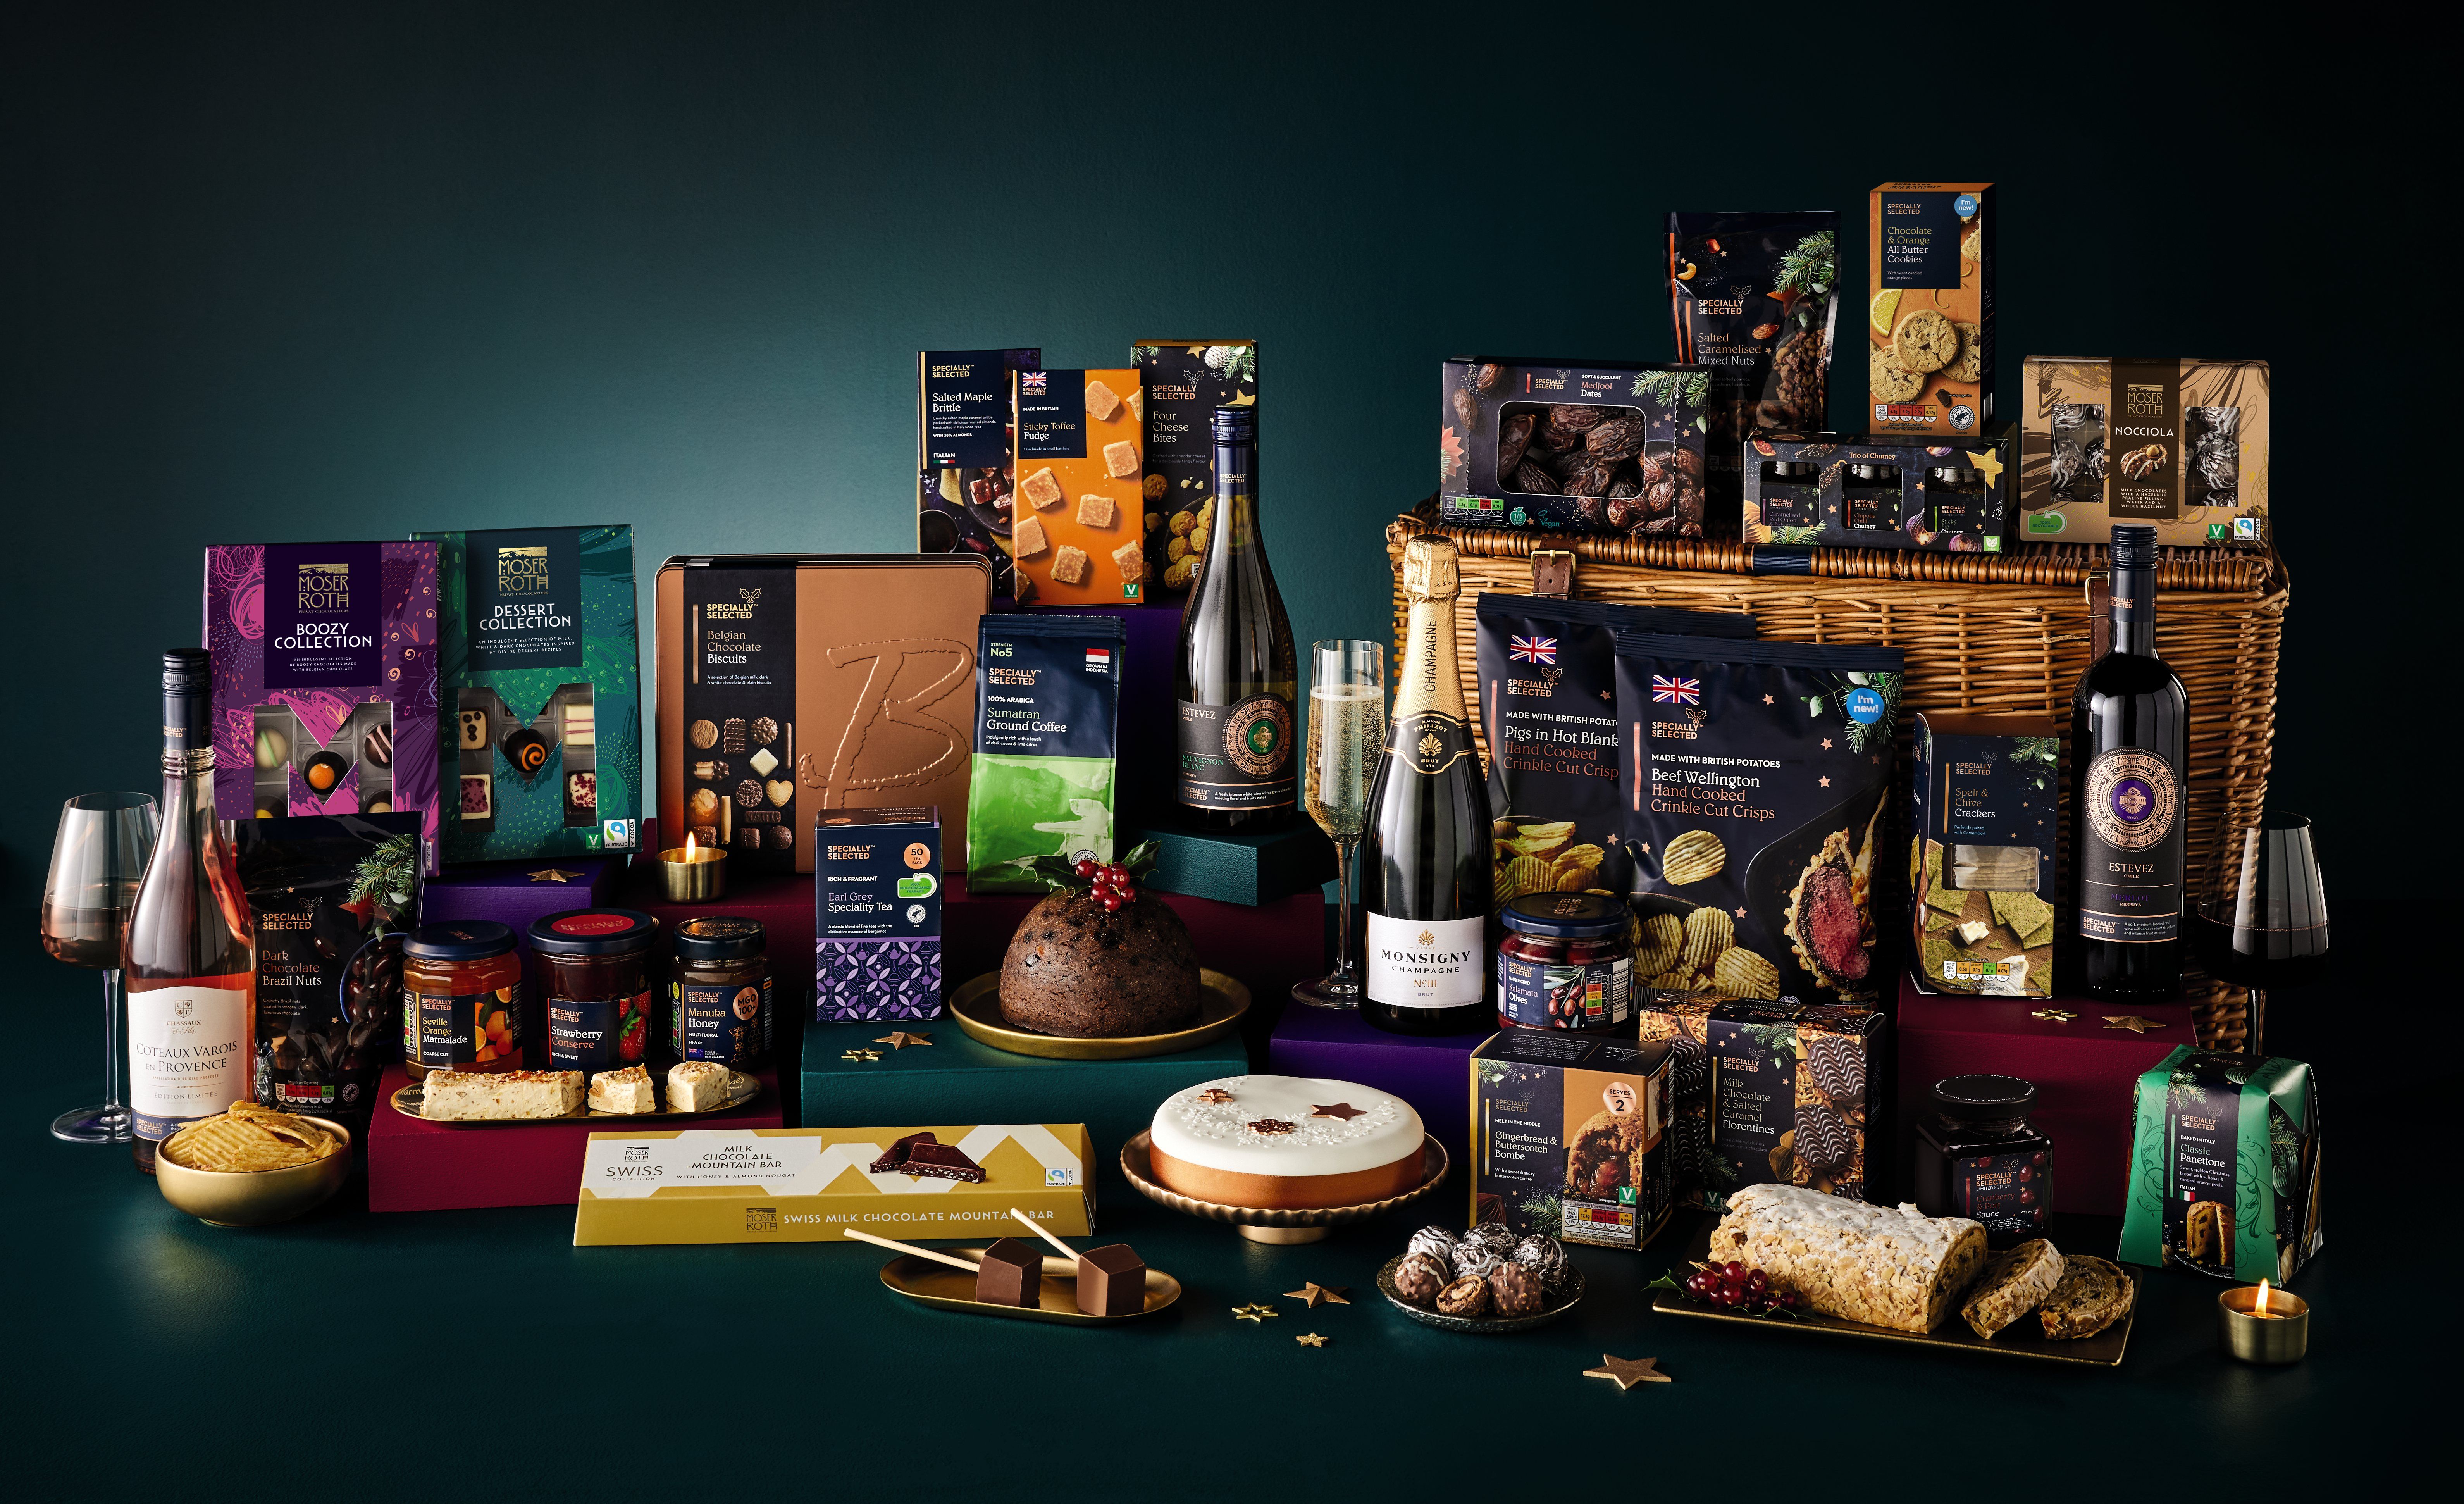 Aldi's Christmas gift hampers are back